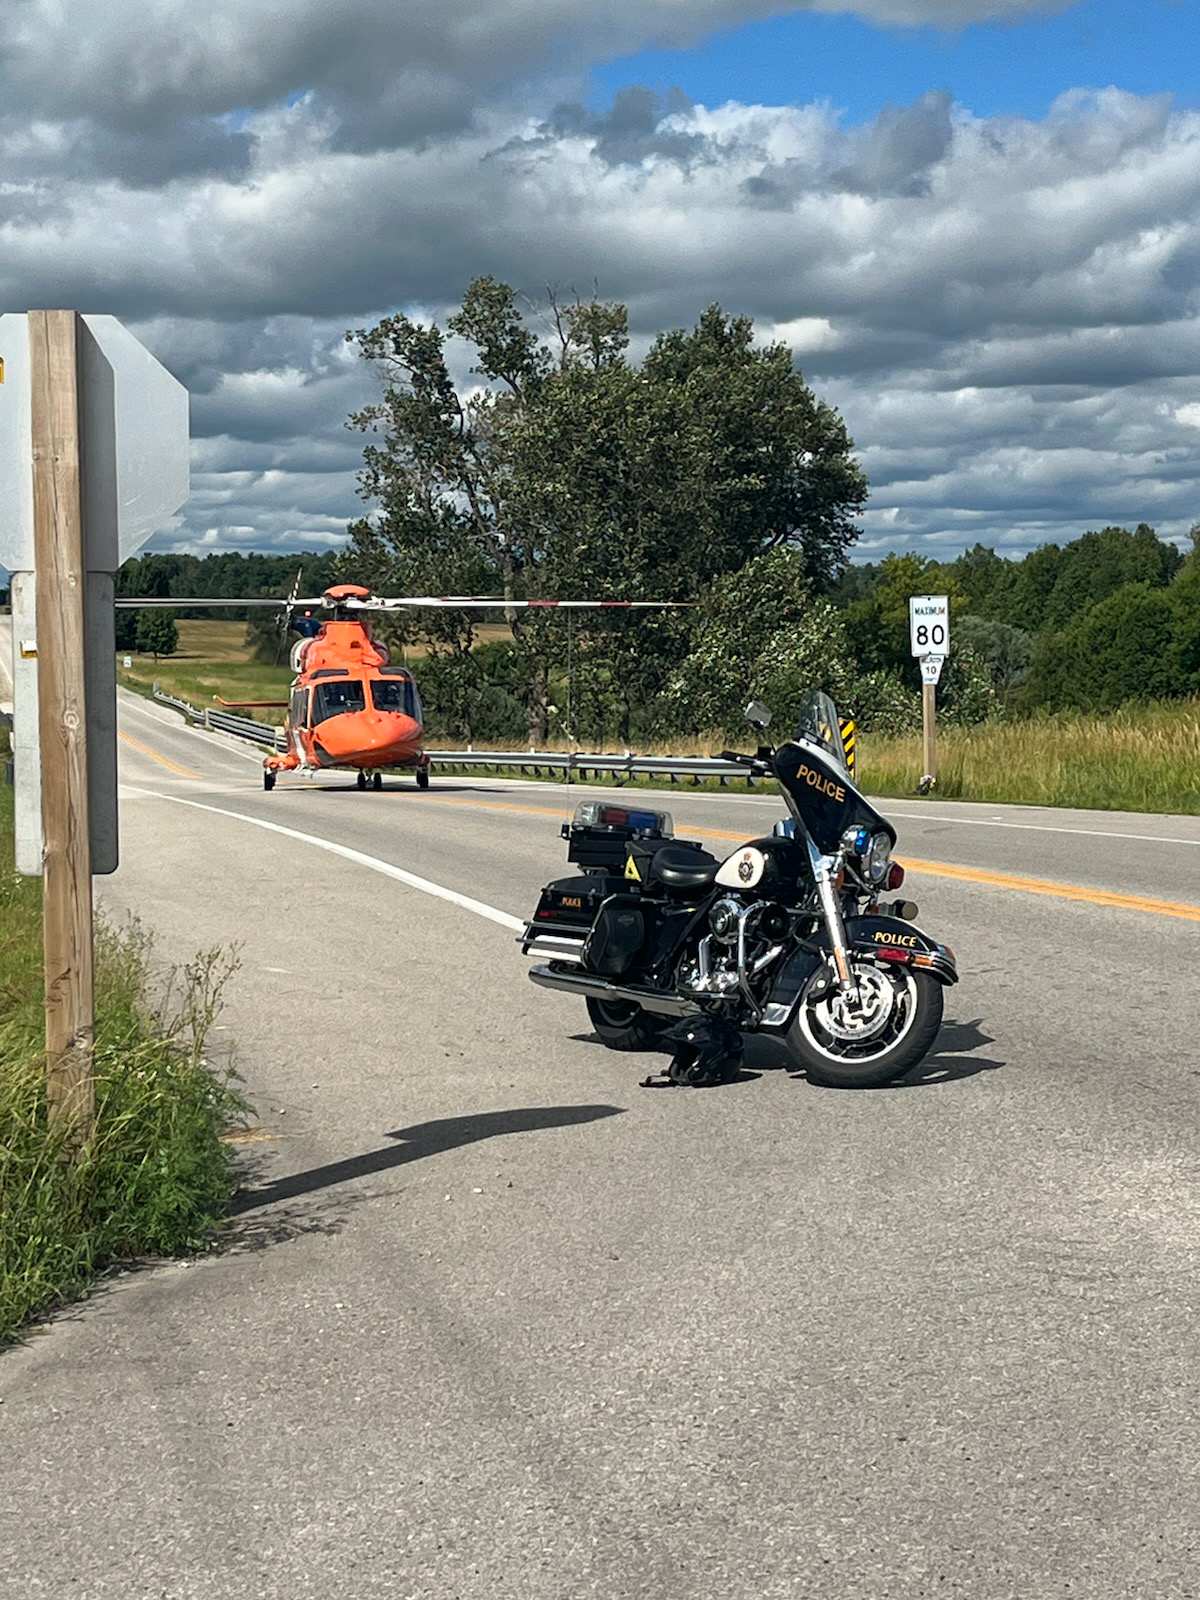 Air ambulance and OPP motorcycle at scene of crash in Mapleton.